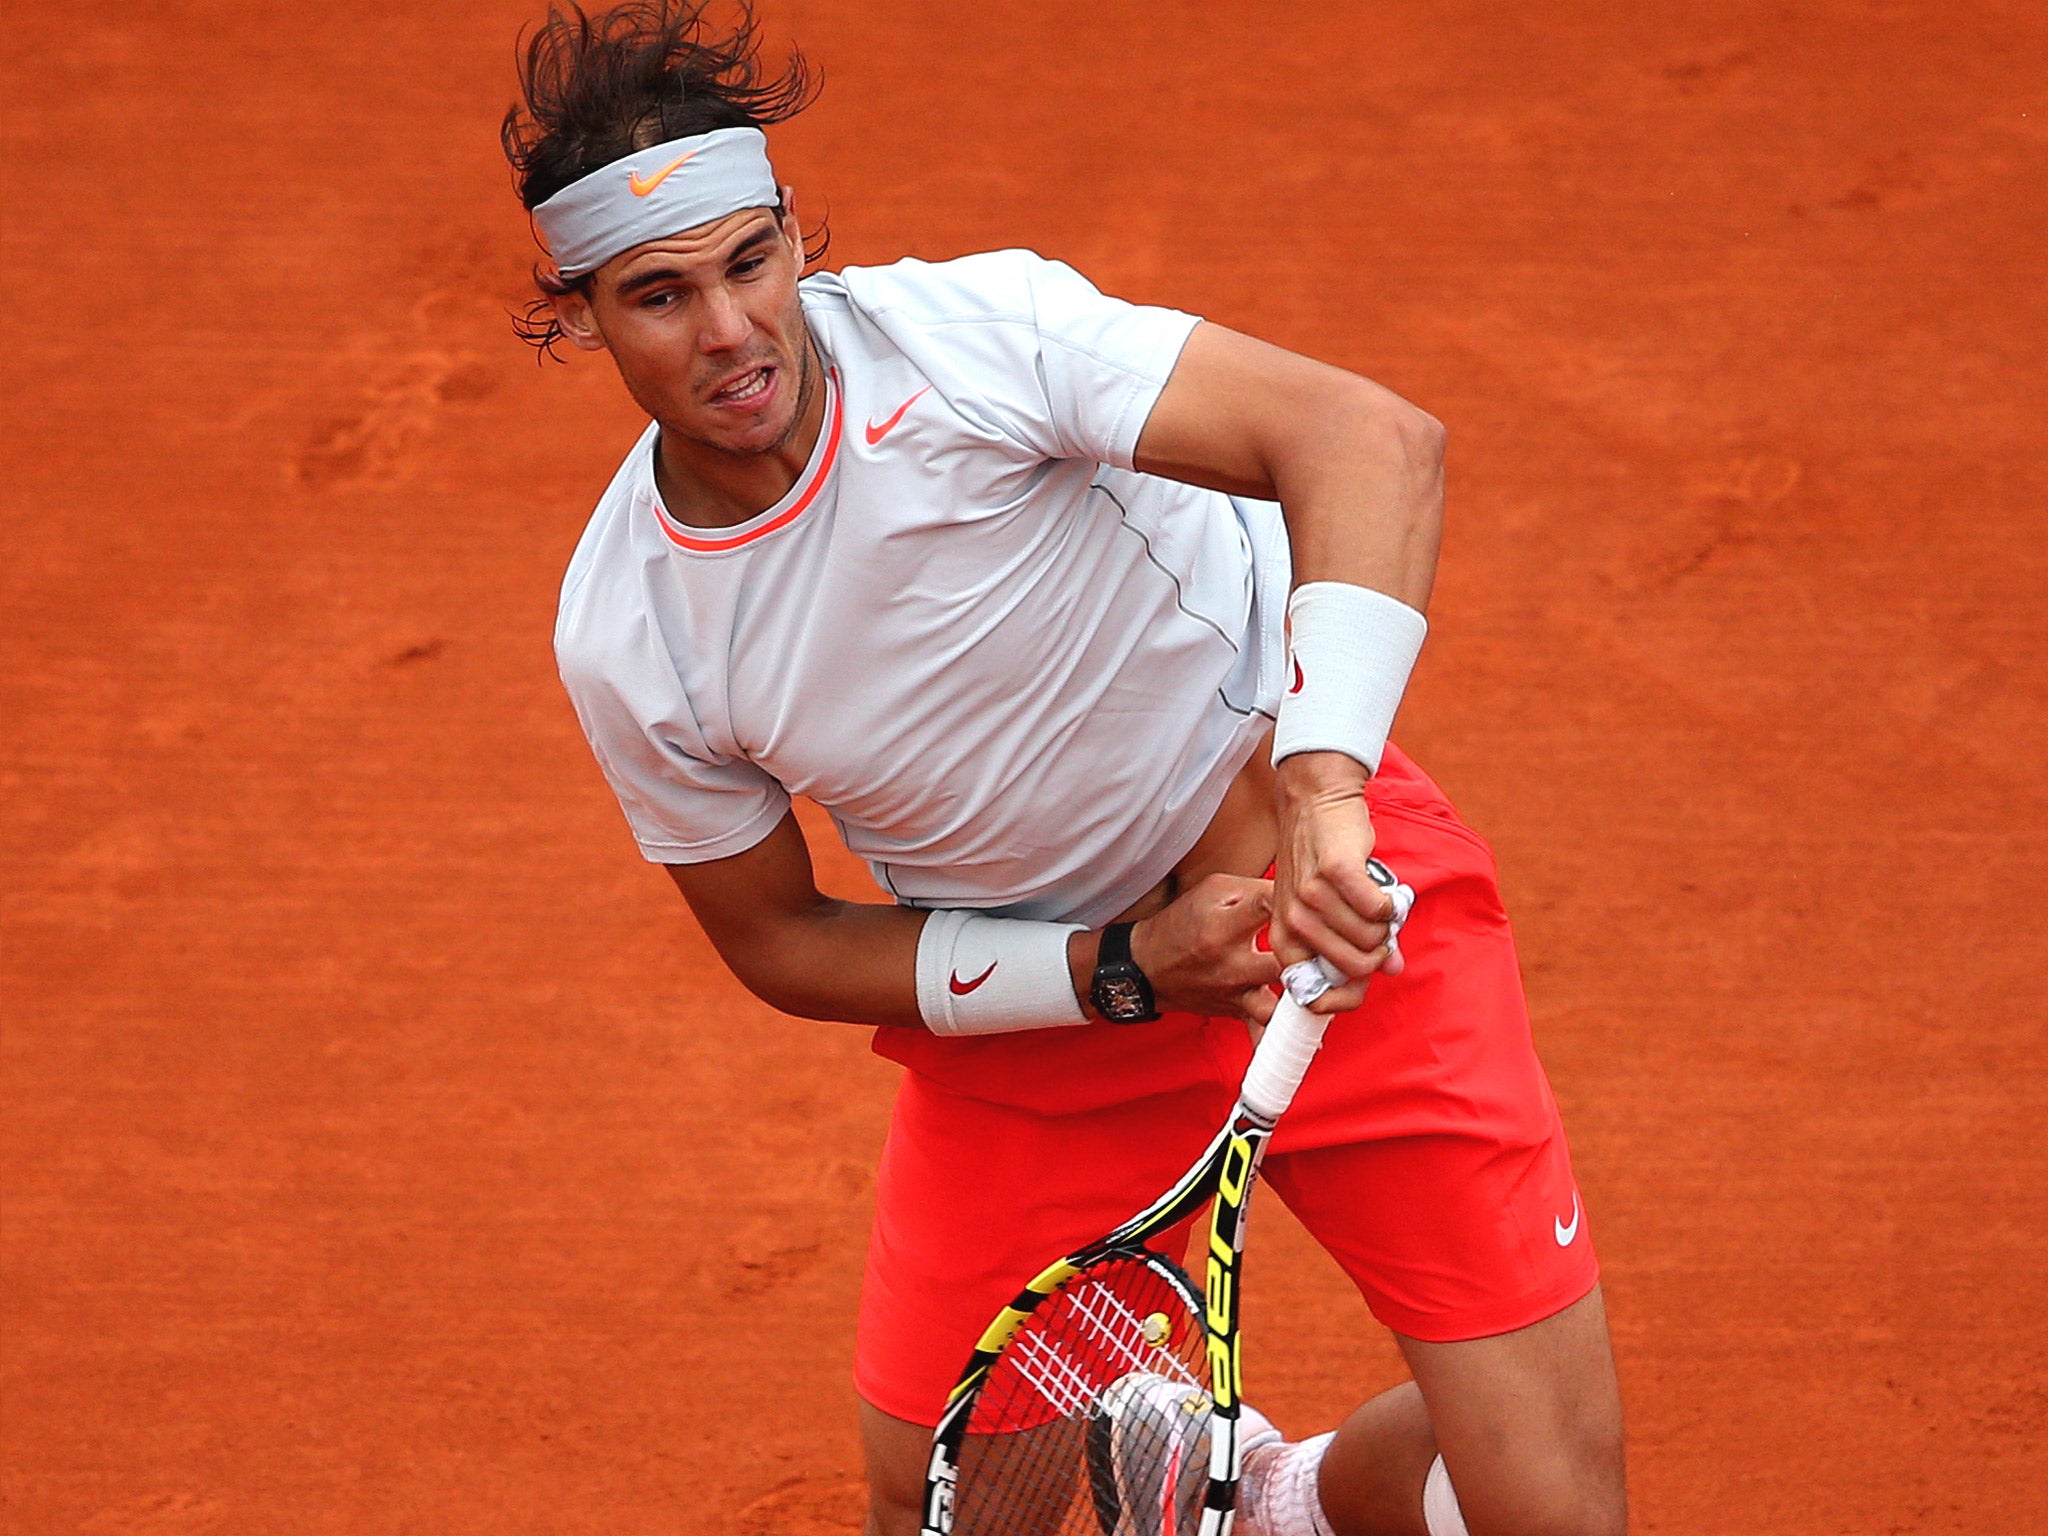 Rafael Nadal winning last year’s French Open final. He has lost only once at Roland Garros